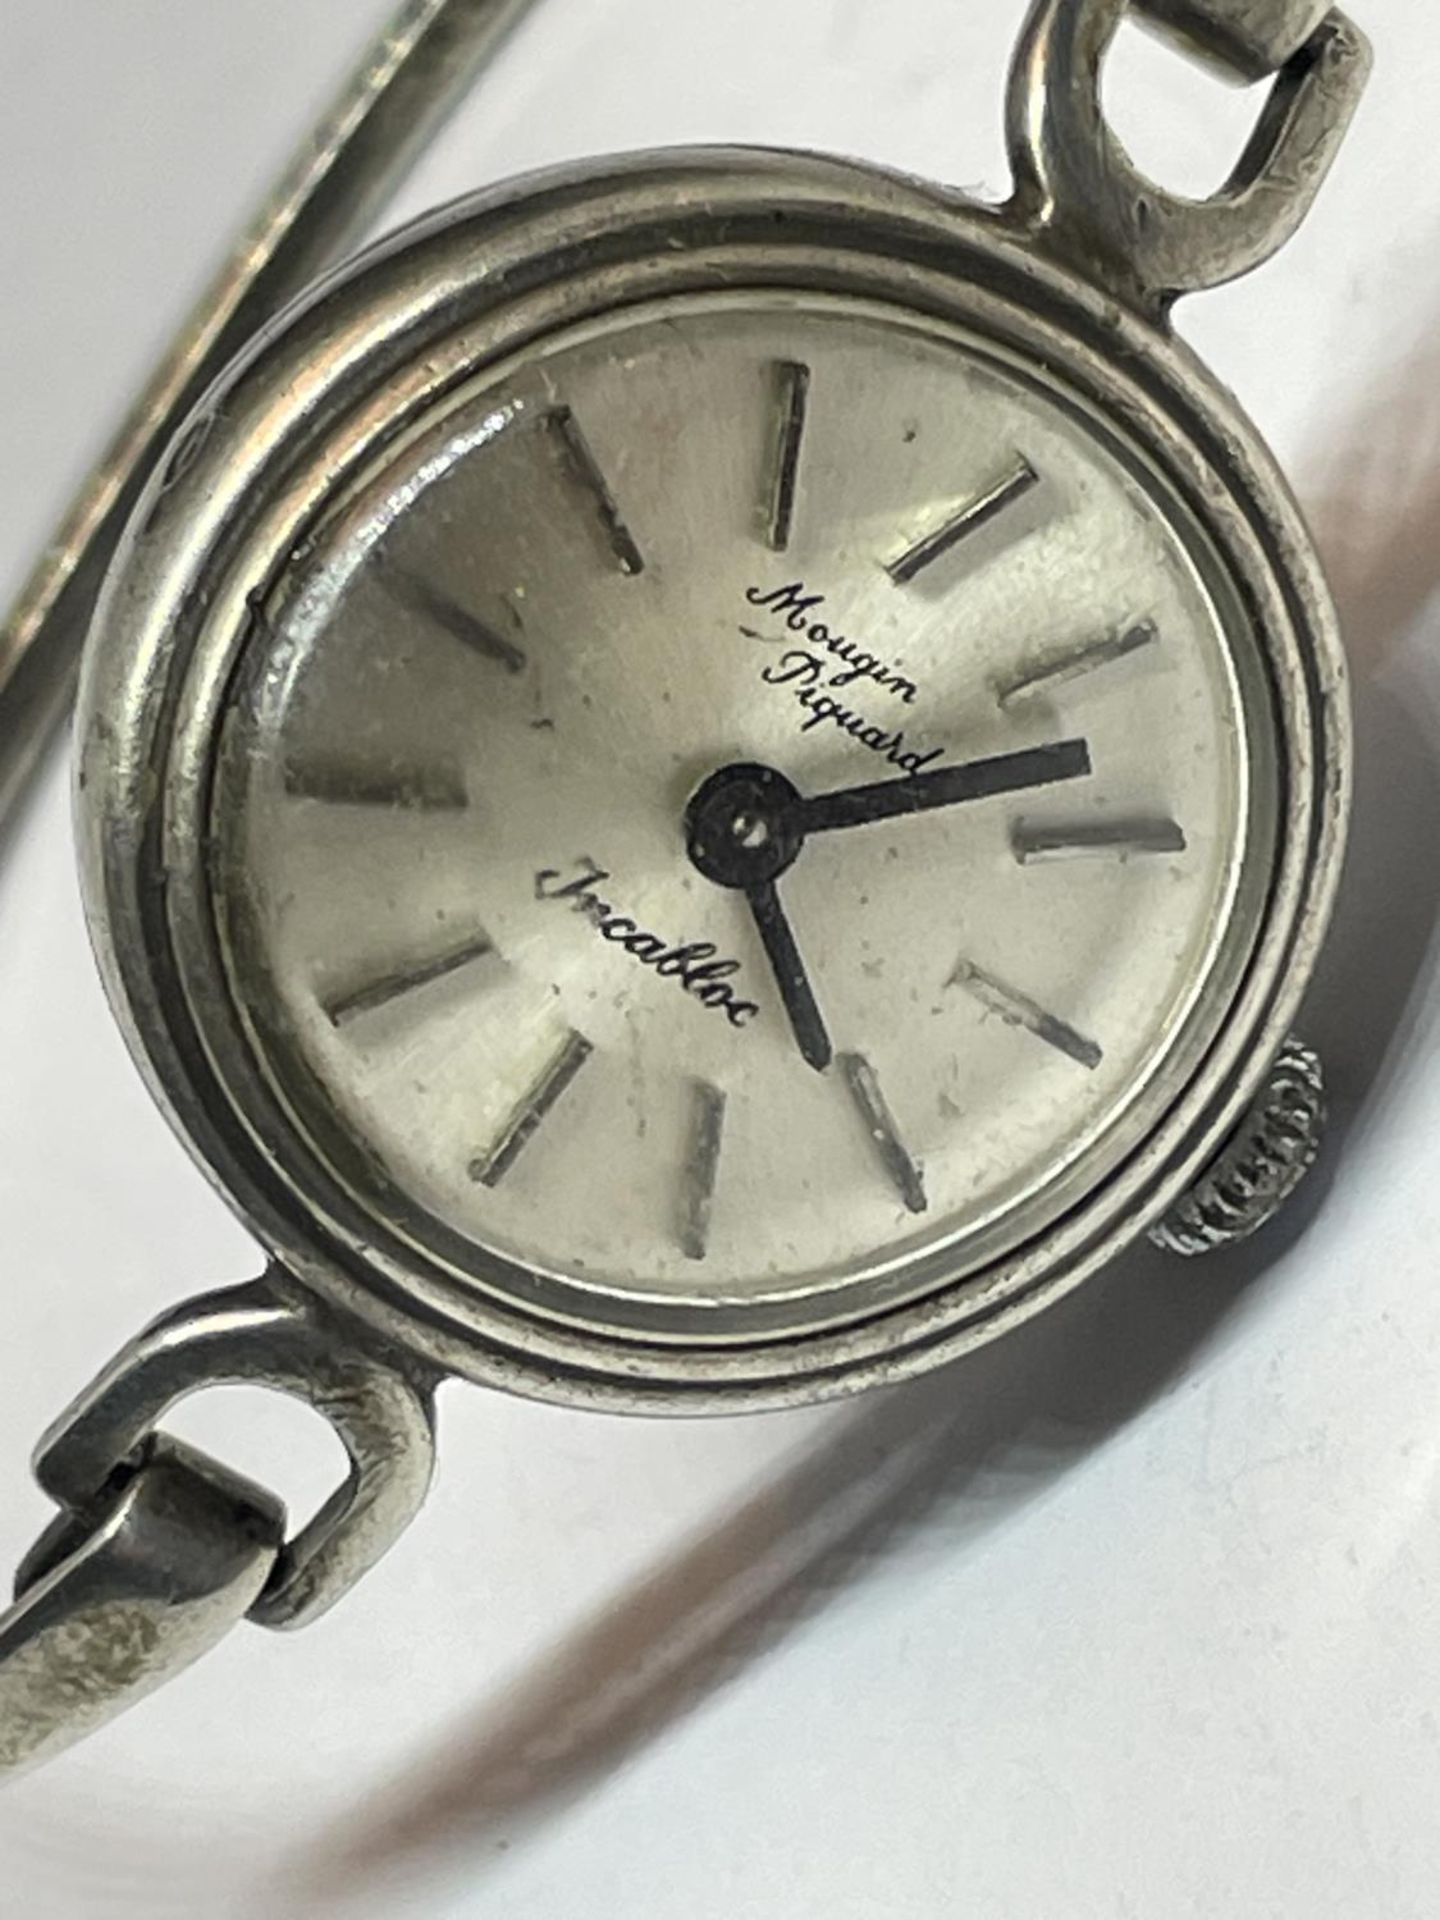 A VINTAGE SILVER WRIST WATCH - Image 2 of 3